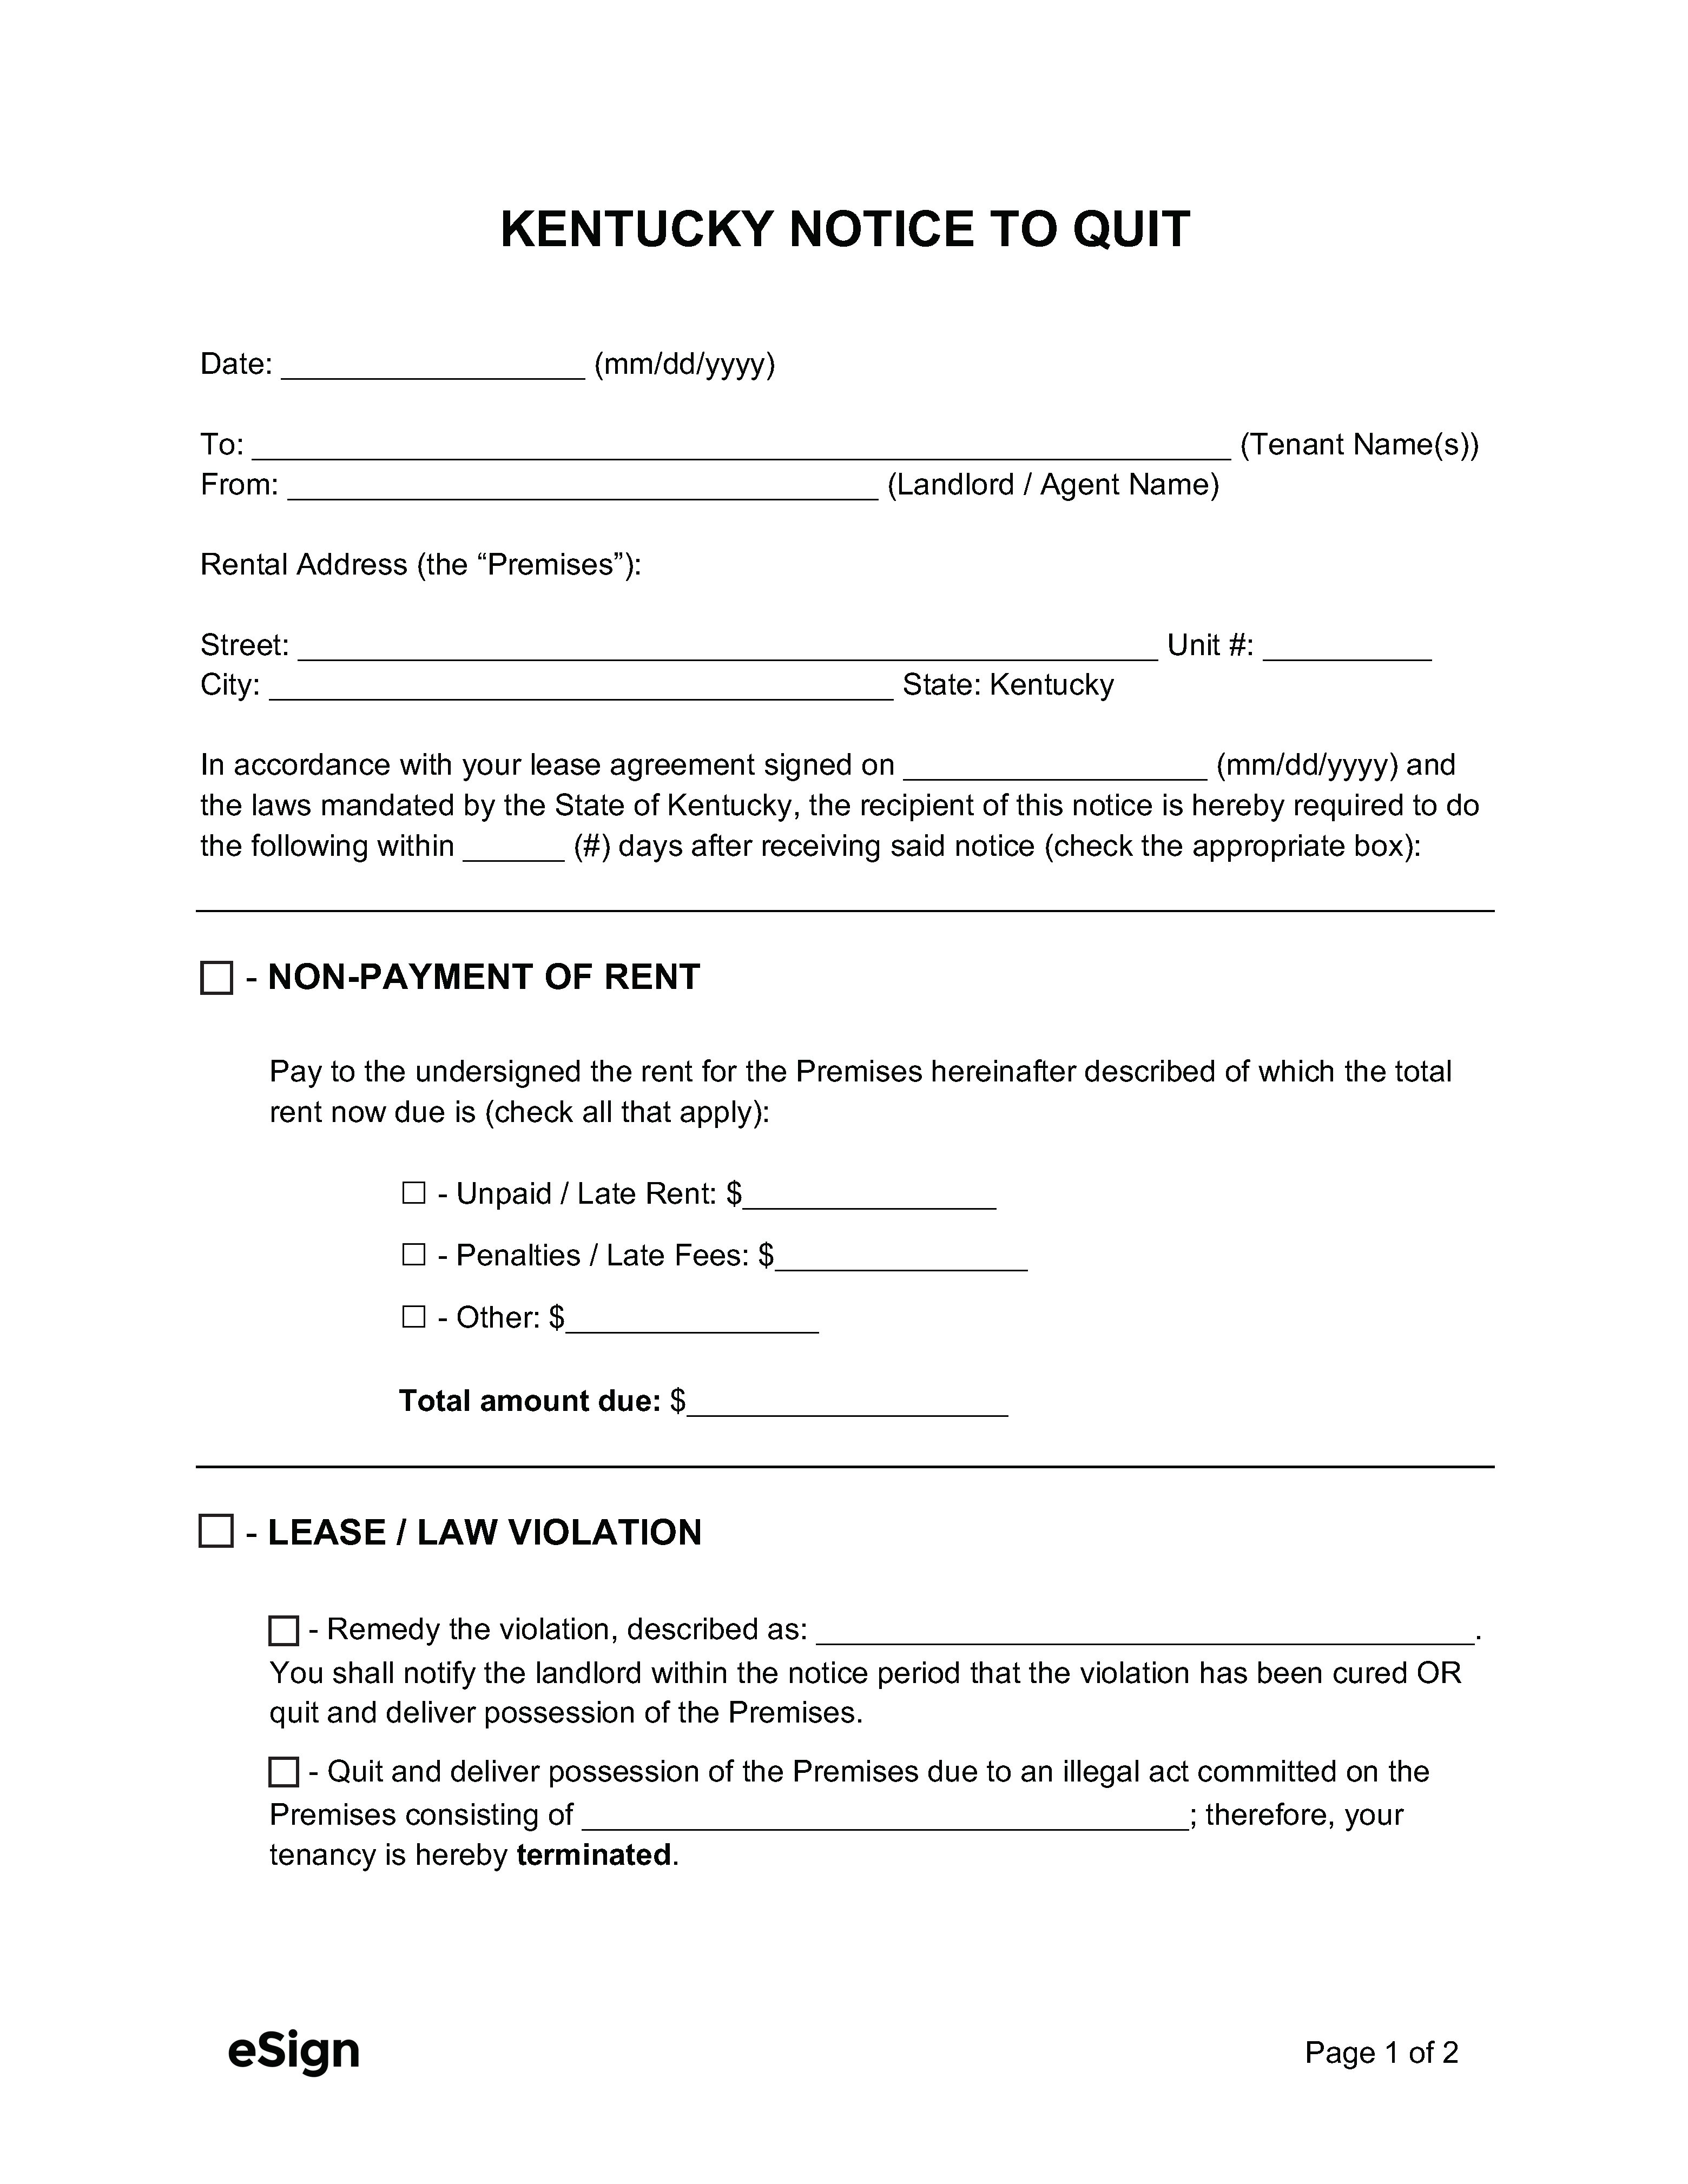 Free Kentucky Eviction Notice Templates (3) PDF Word